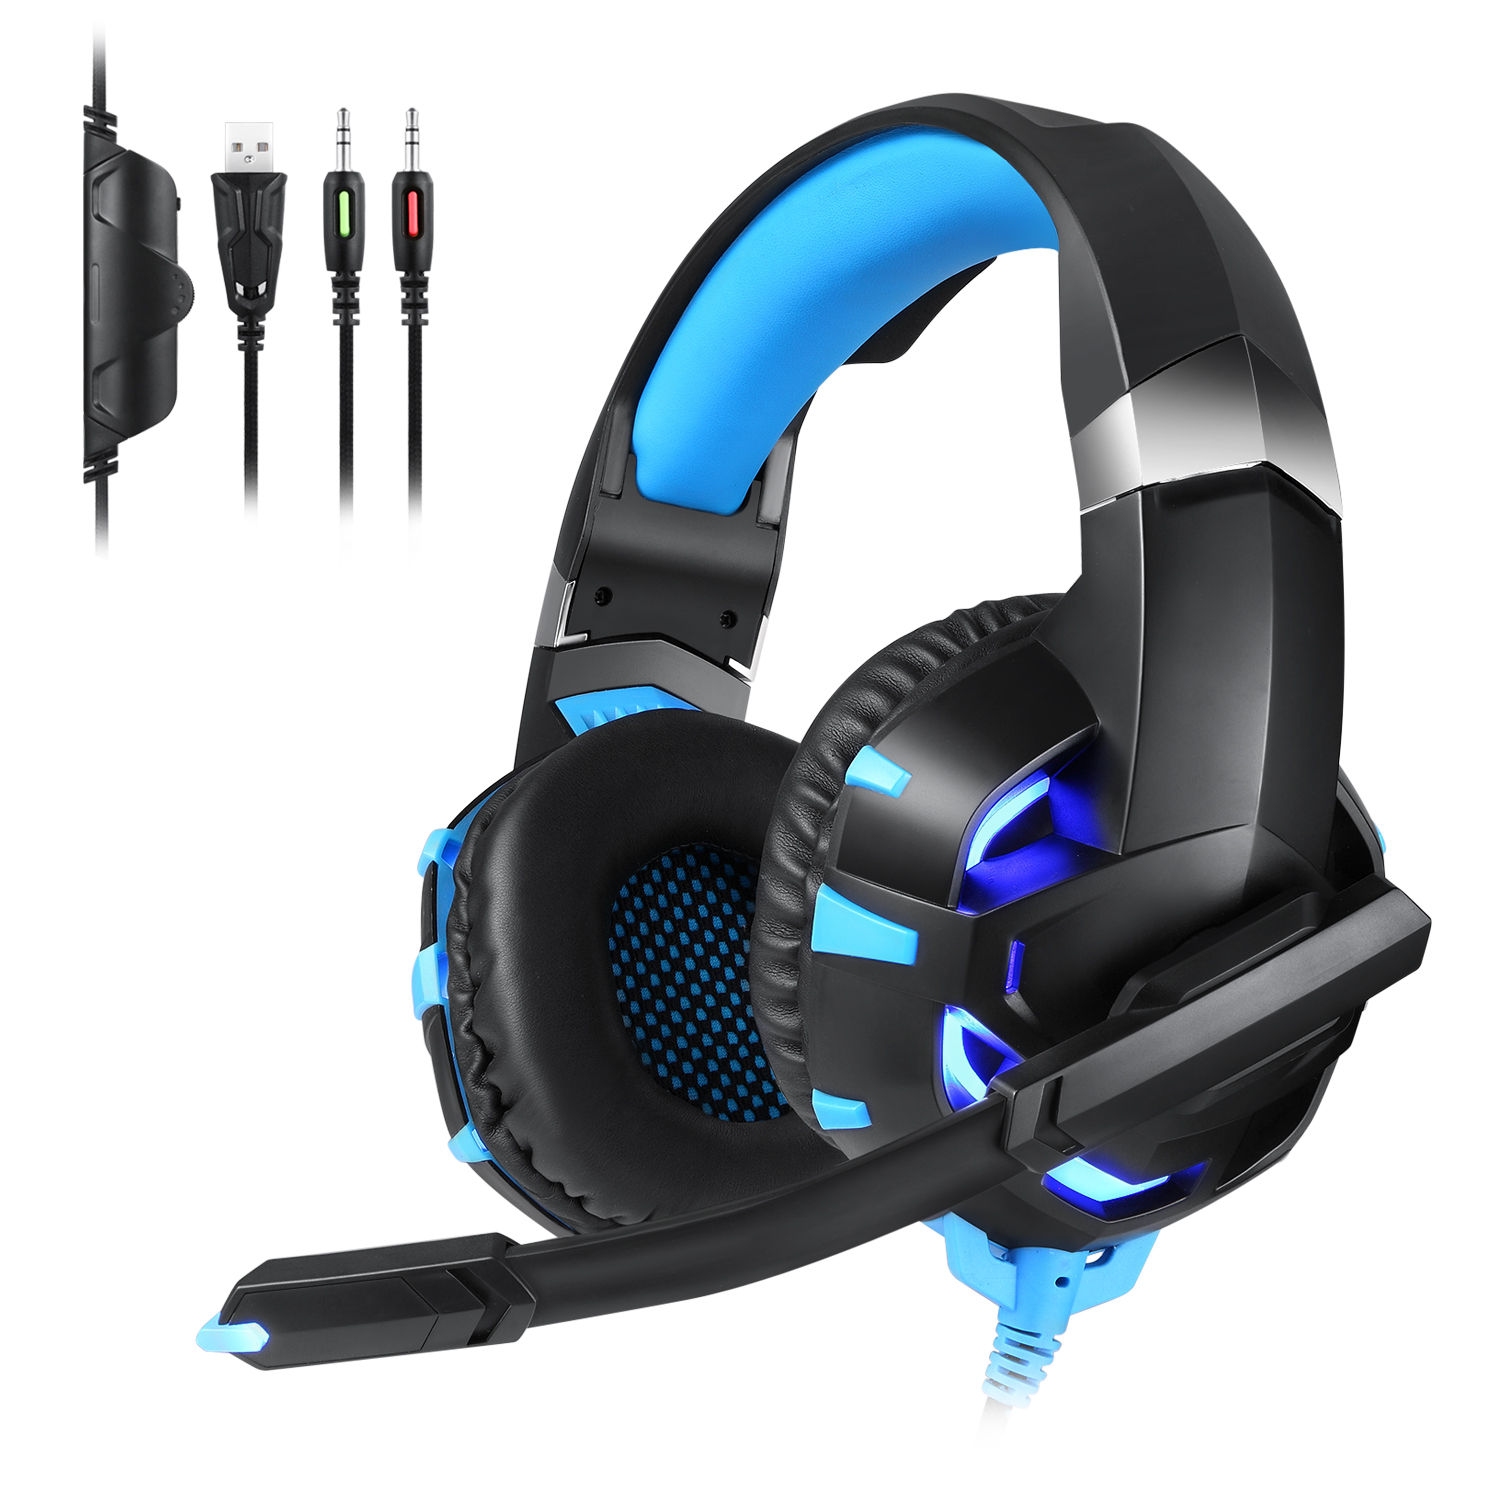 Tyshen Popular Wired Gaming Headset Headphones 7.1 Surround Gamer Headphone USB Blue LED Light Display Cheap Wire Colorful Computer Stereo Earphone